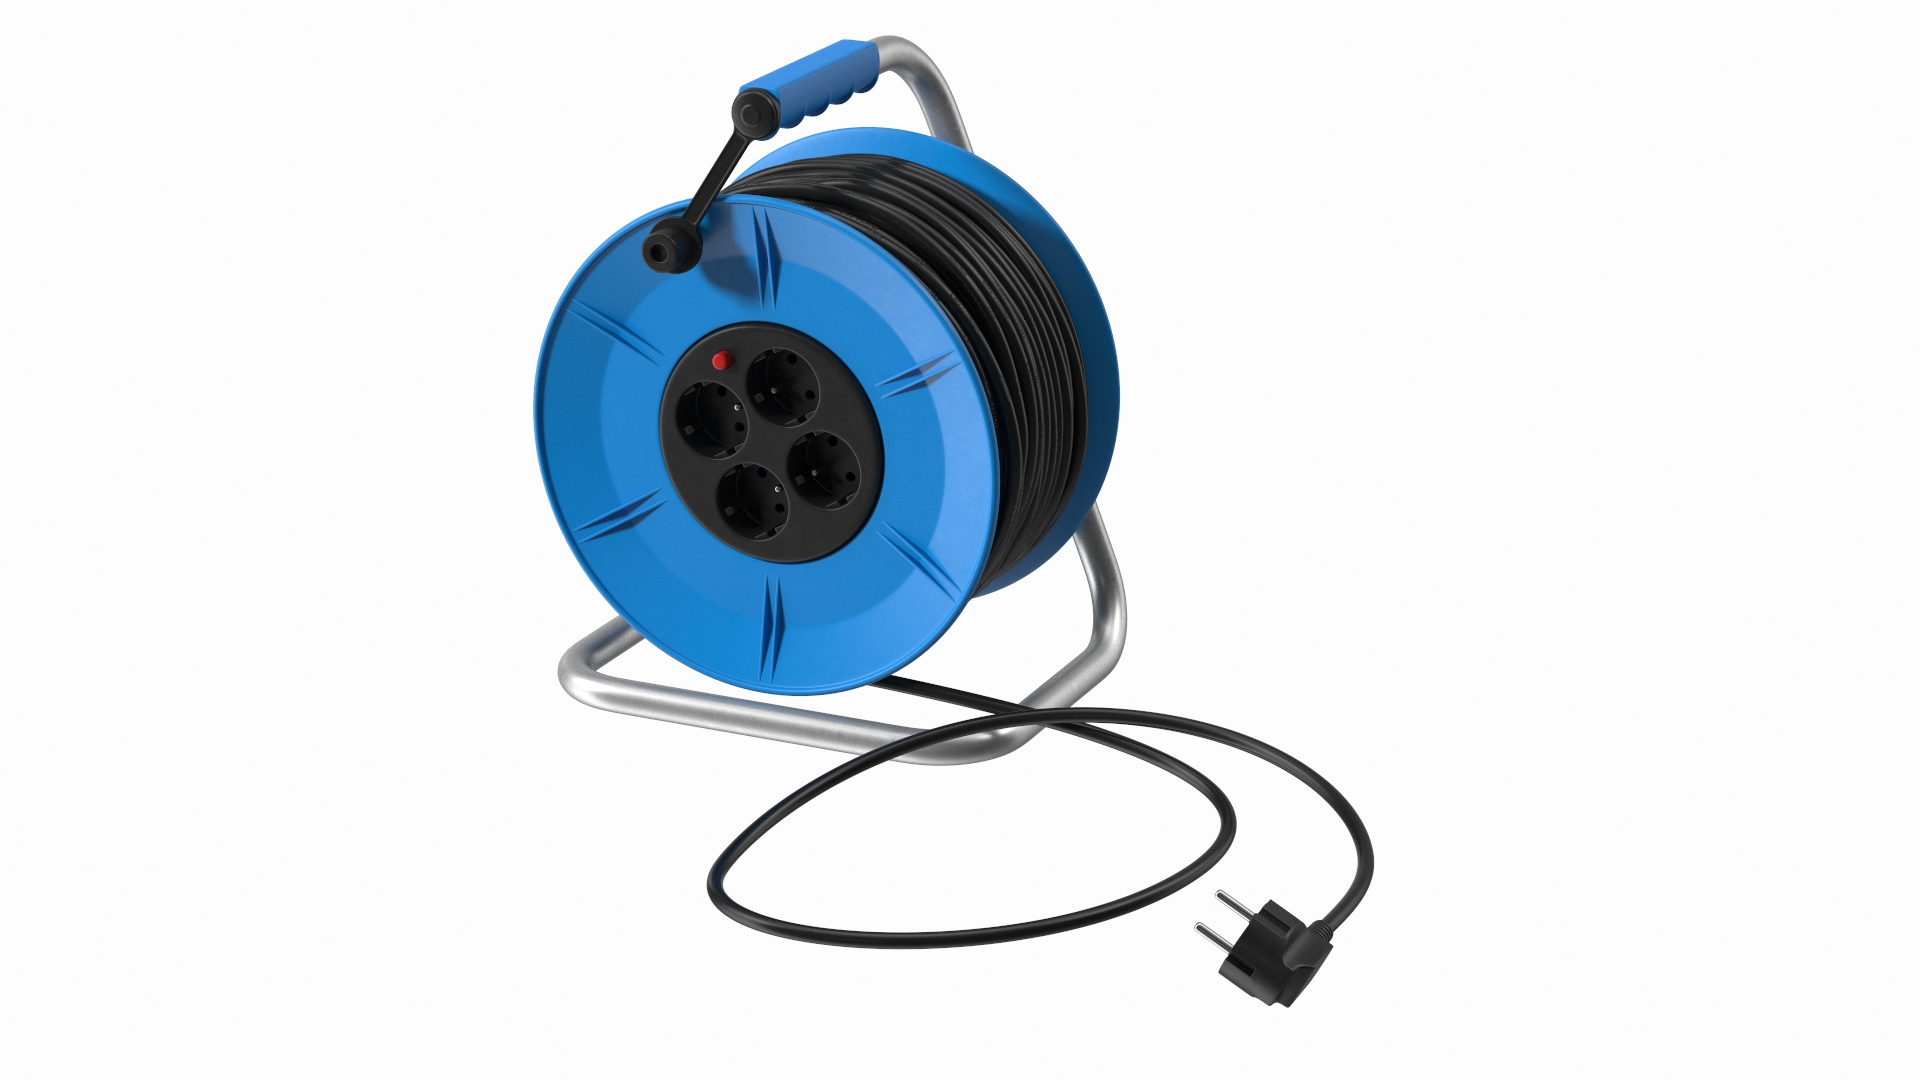 3D Retractable Extension Cord Reel With Electric Outlets Model - TurboSquid  1870891